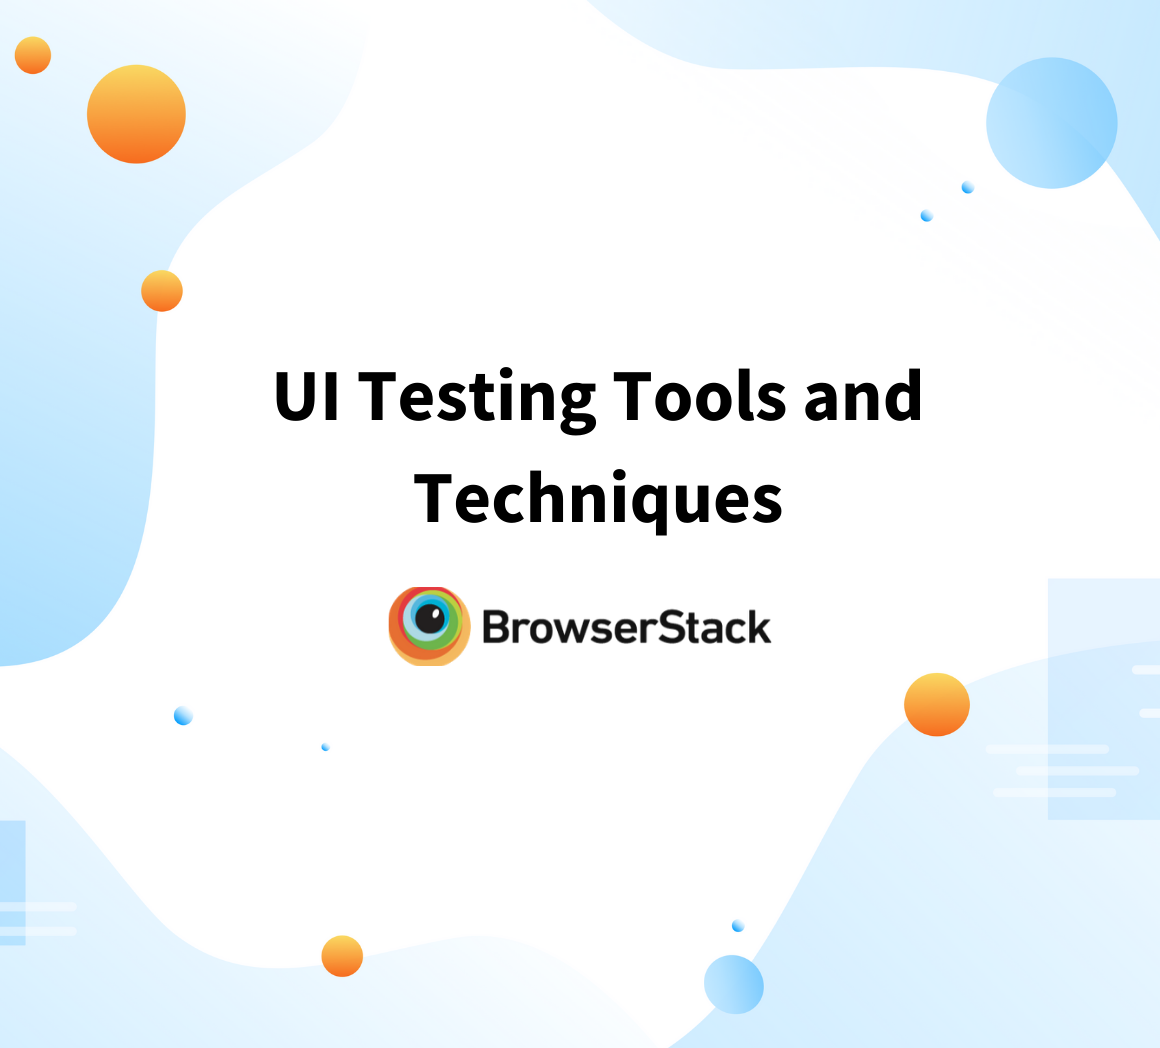 Tools and Techniques for UI Testing